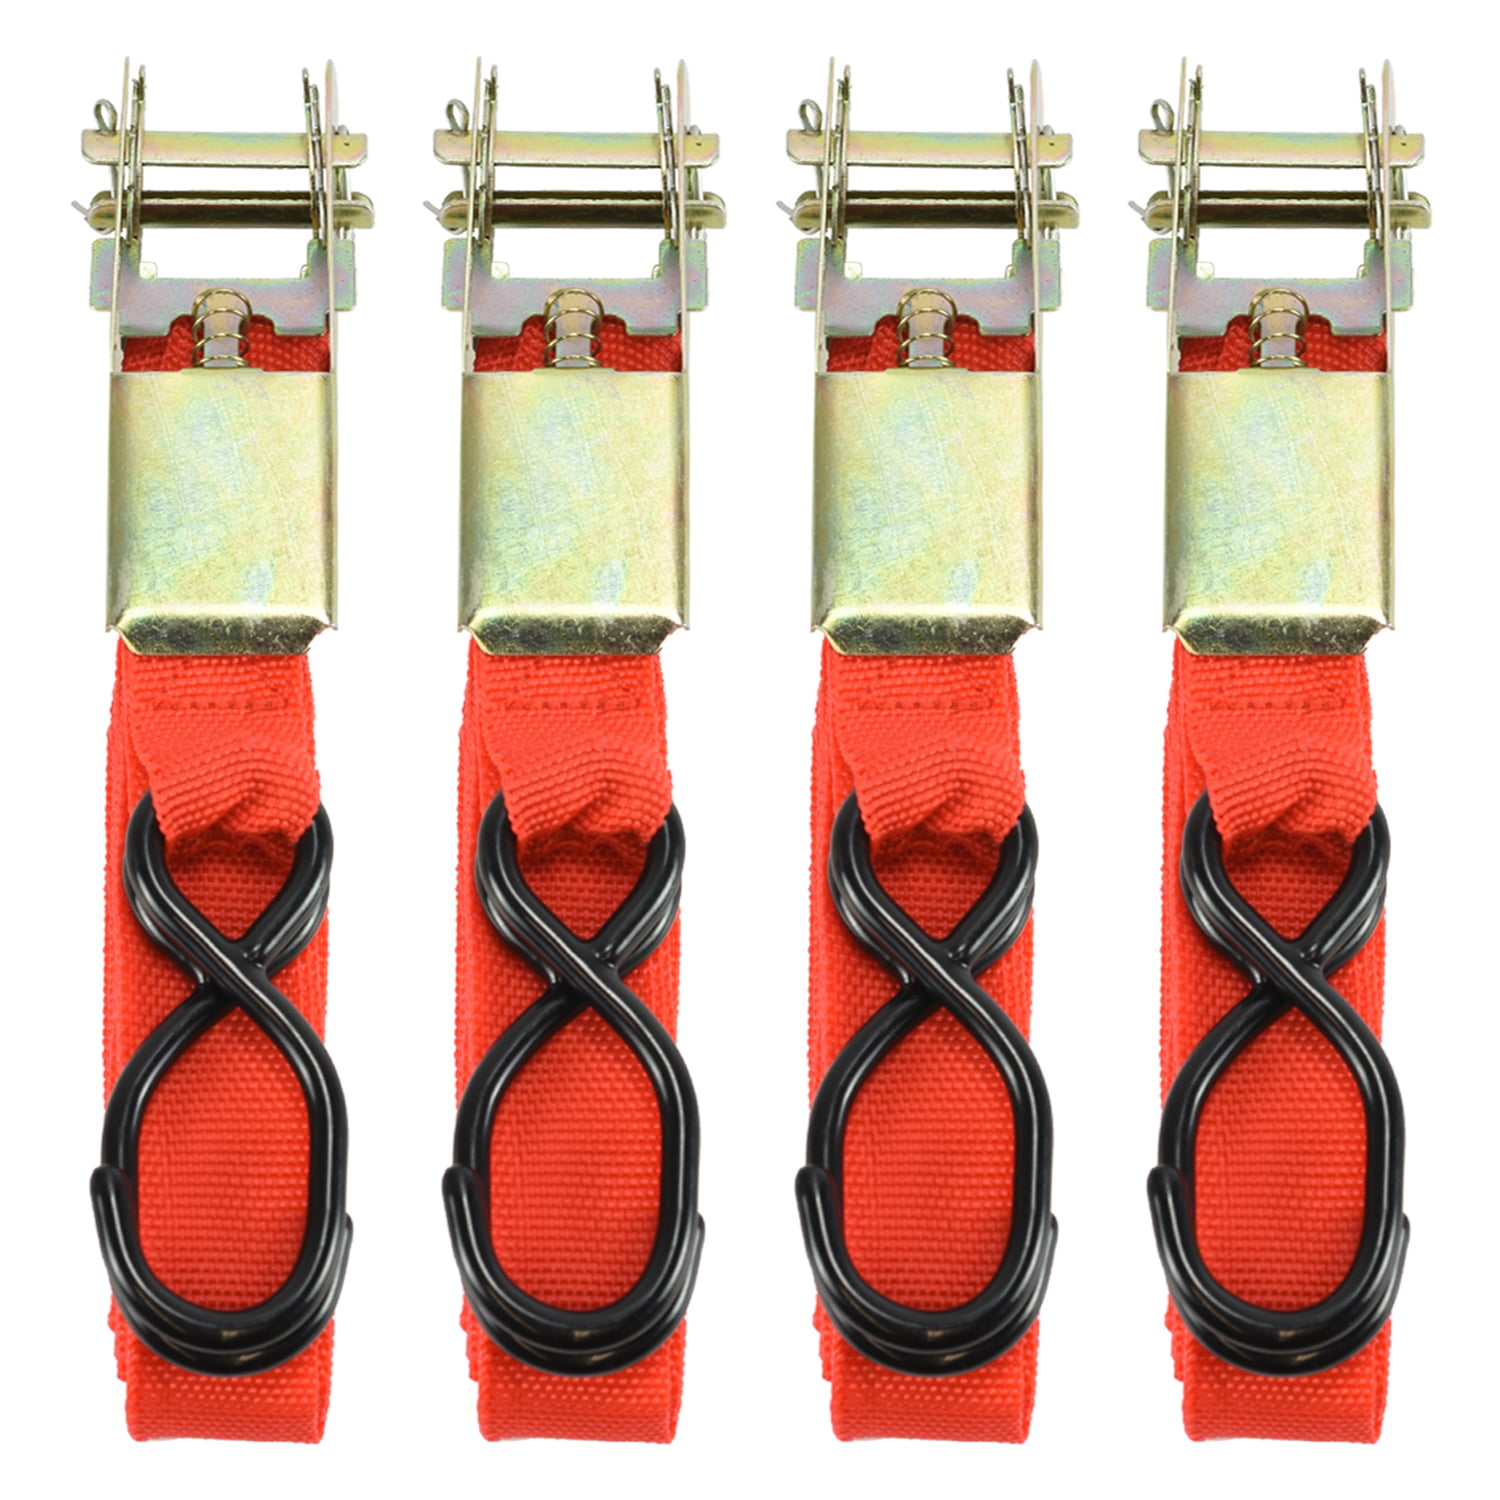 4Pack Ratchet Tie Down Straps Motorcycle Truck Towing Cargo Hauling 1" inchx15ft